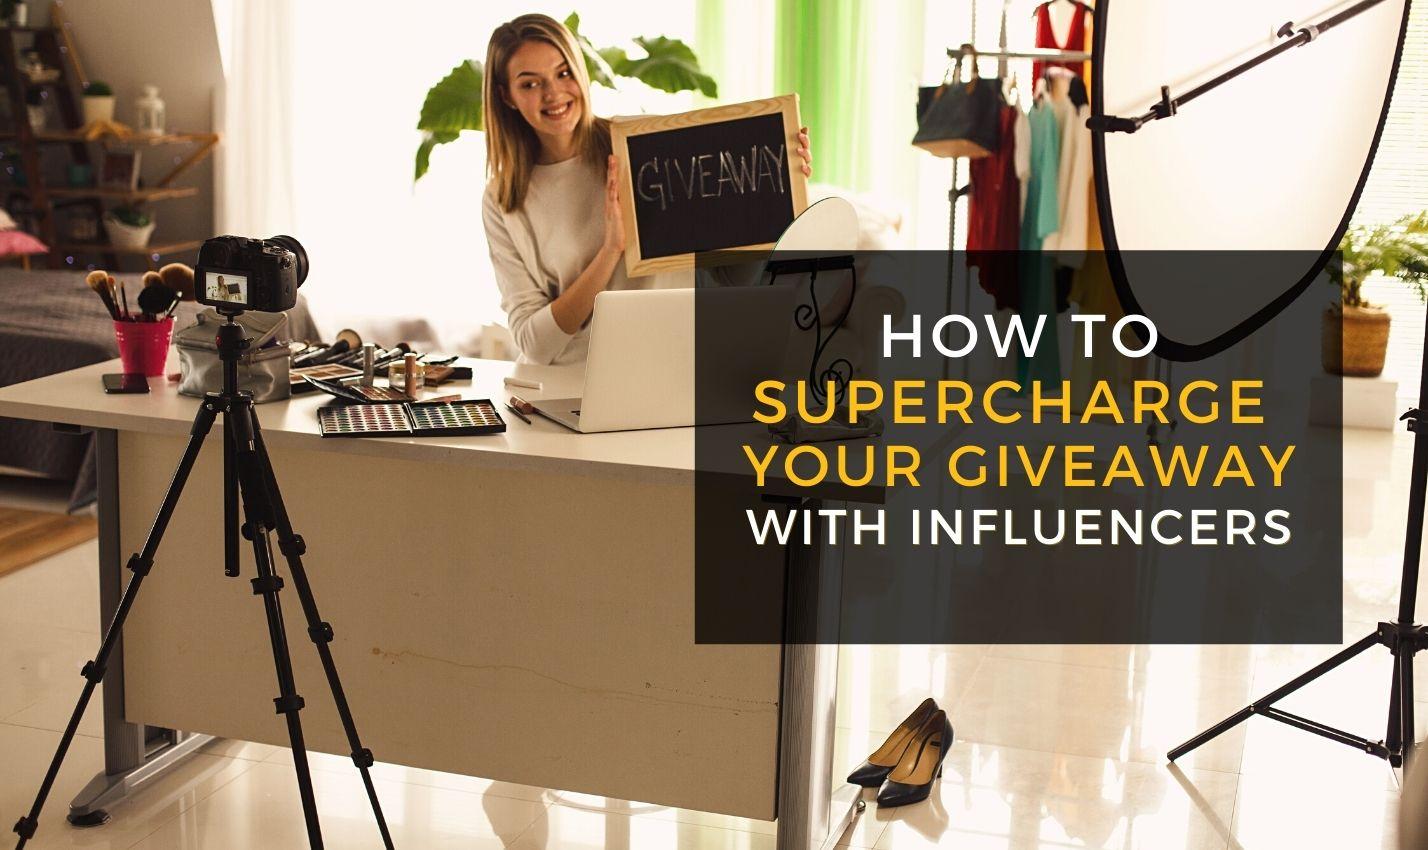 How to organize a social media giveaway with influencers